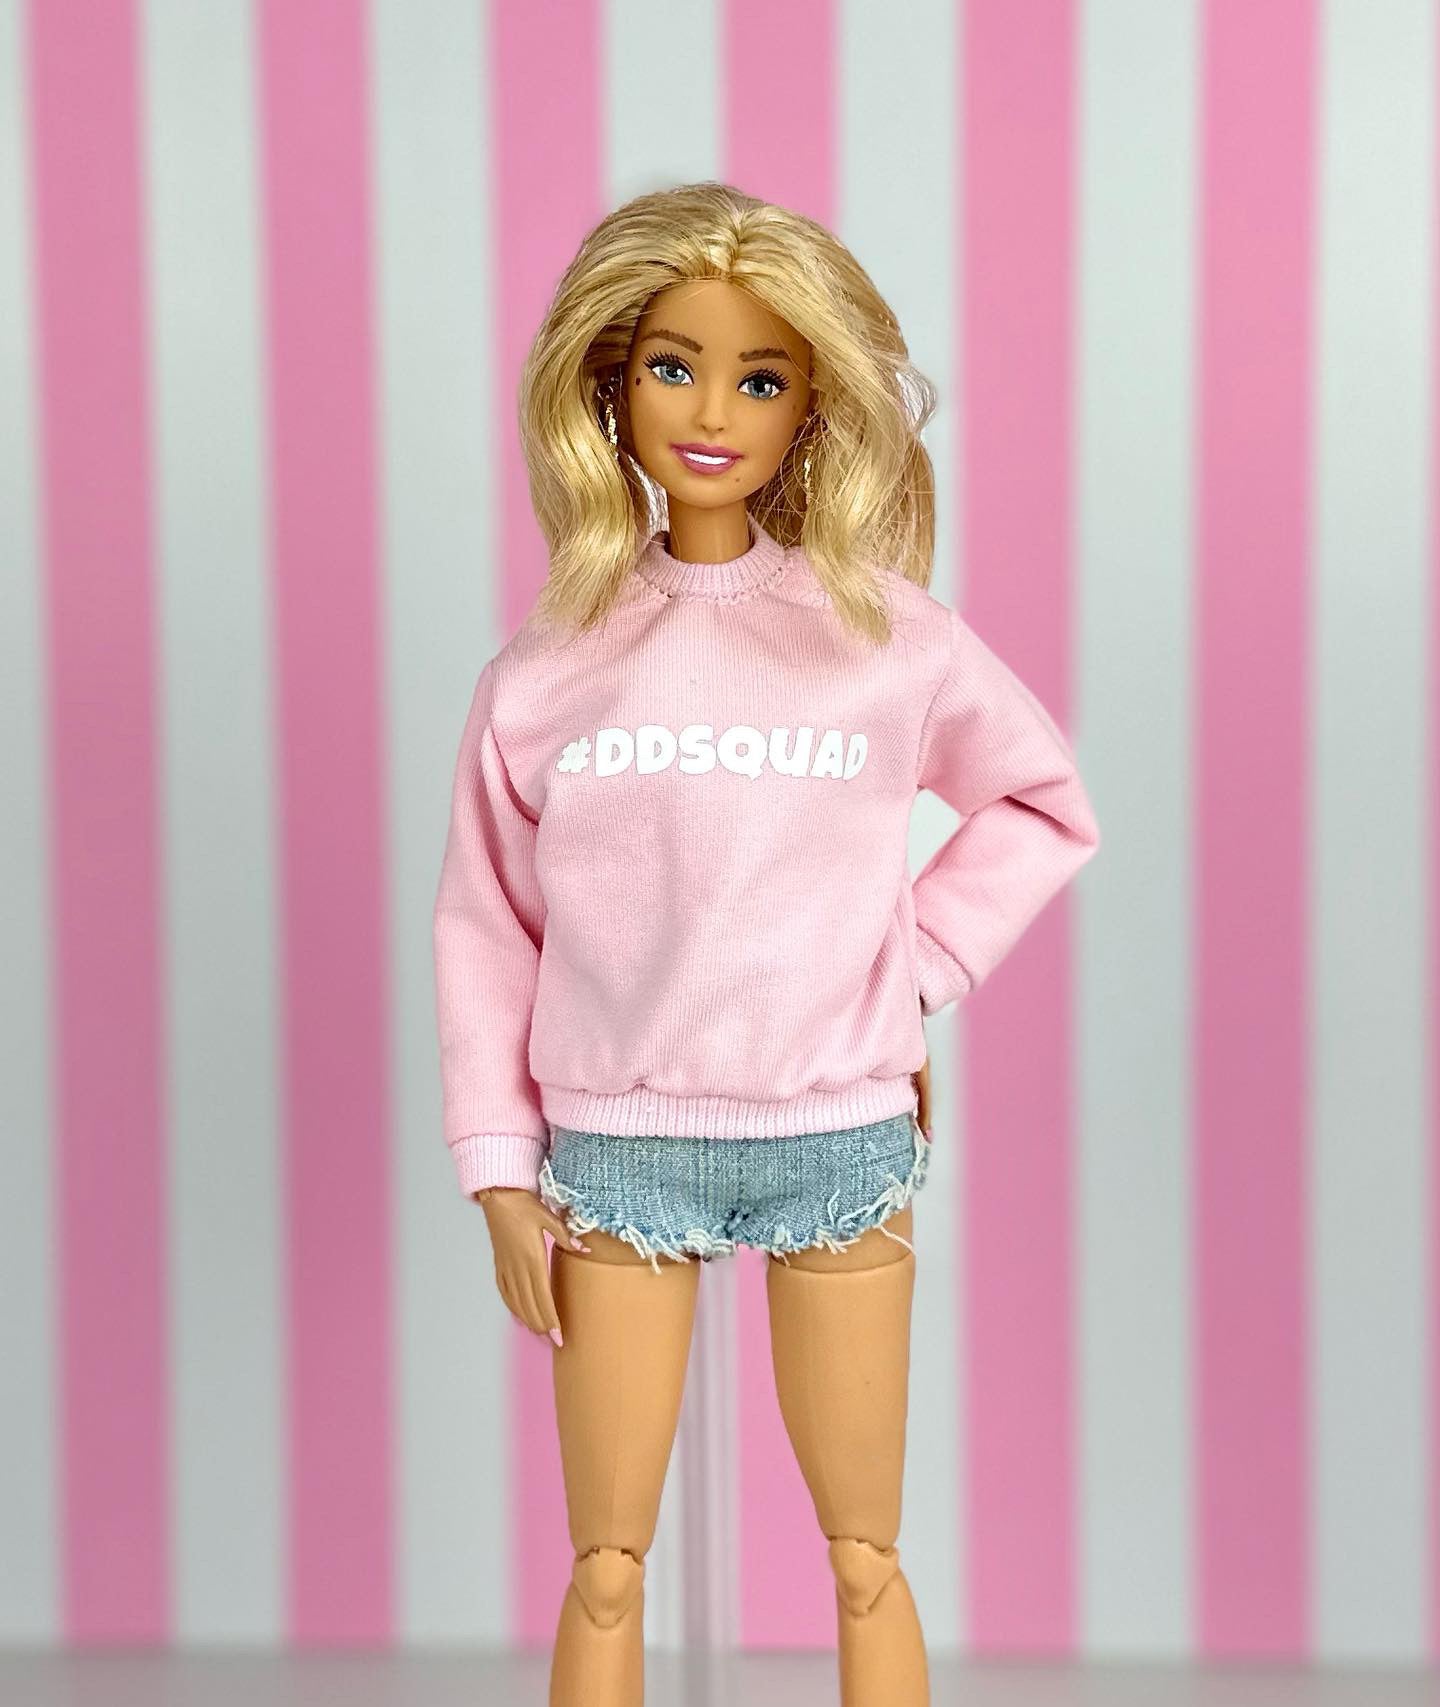 Delightful Dolls Sweatshirt and #ddsquad Sweater for Barbie doll – The ...